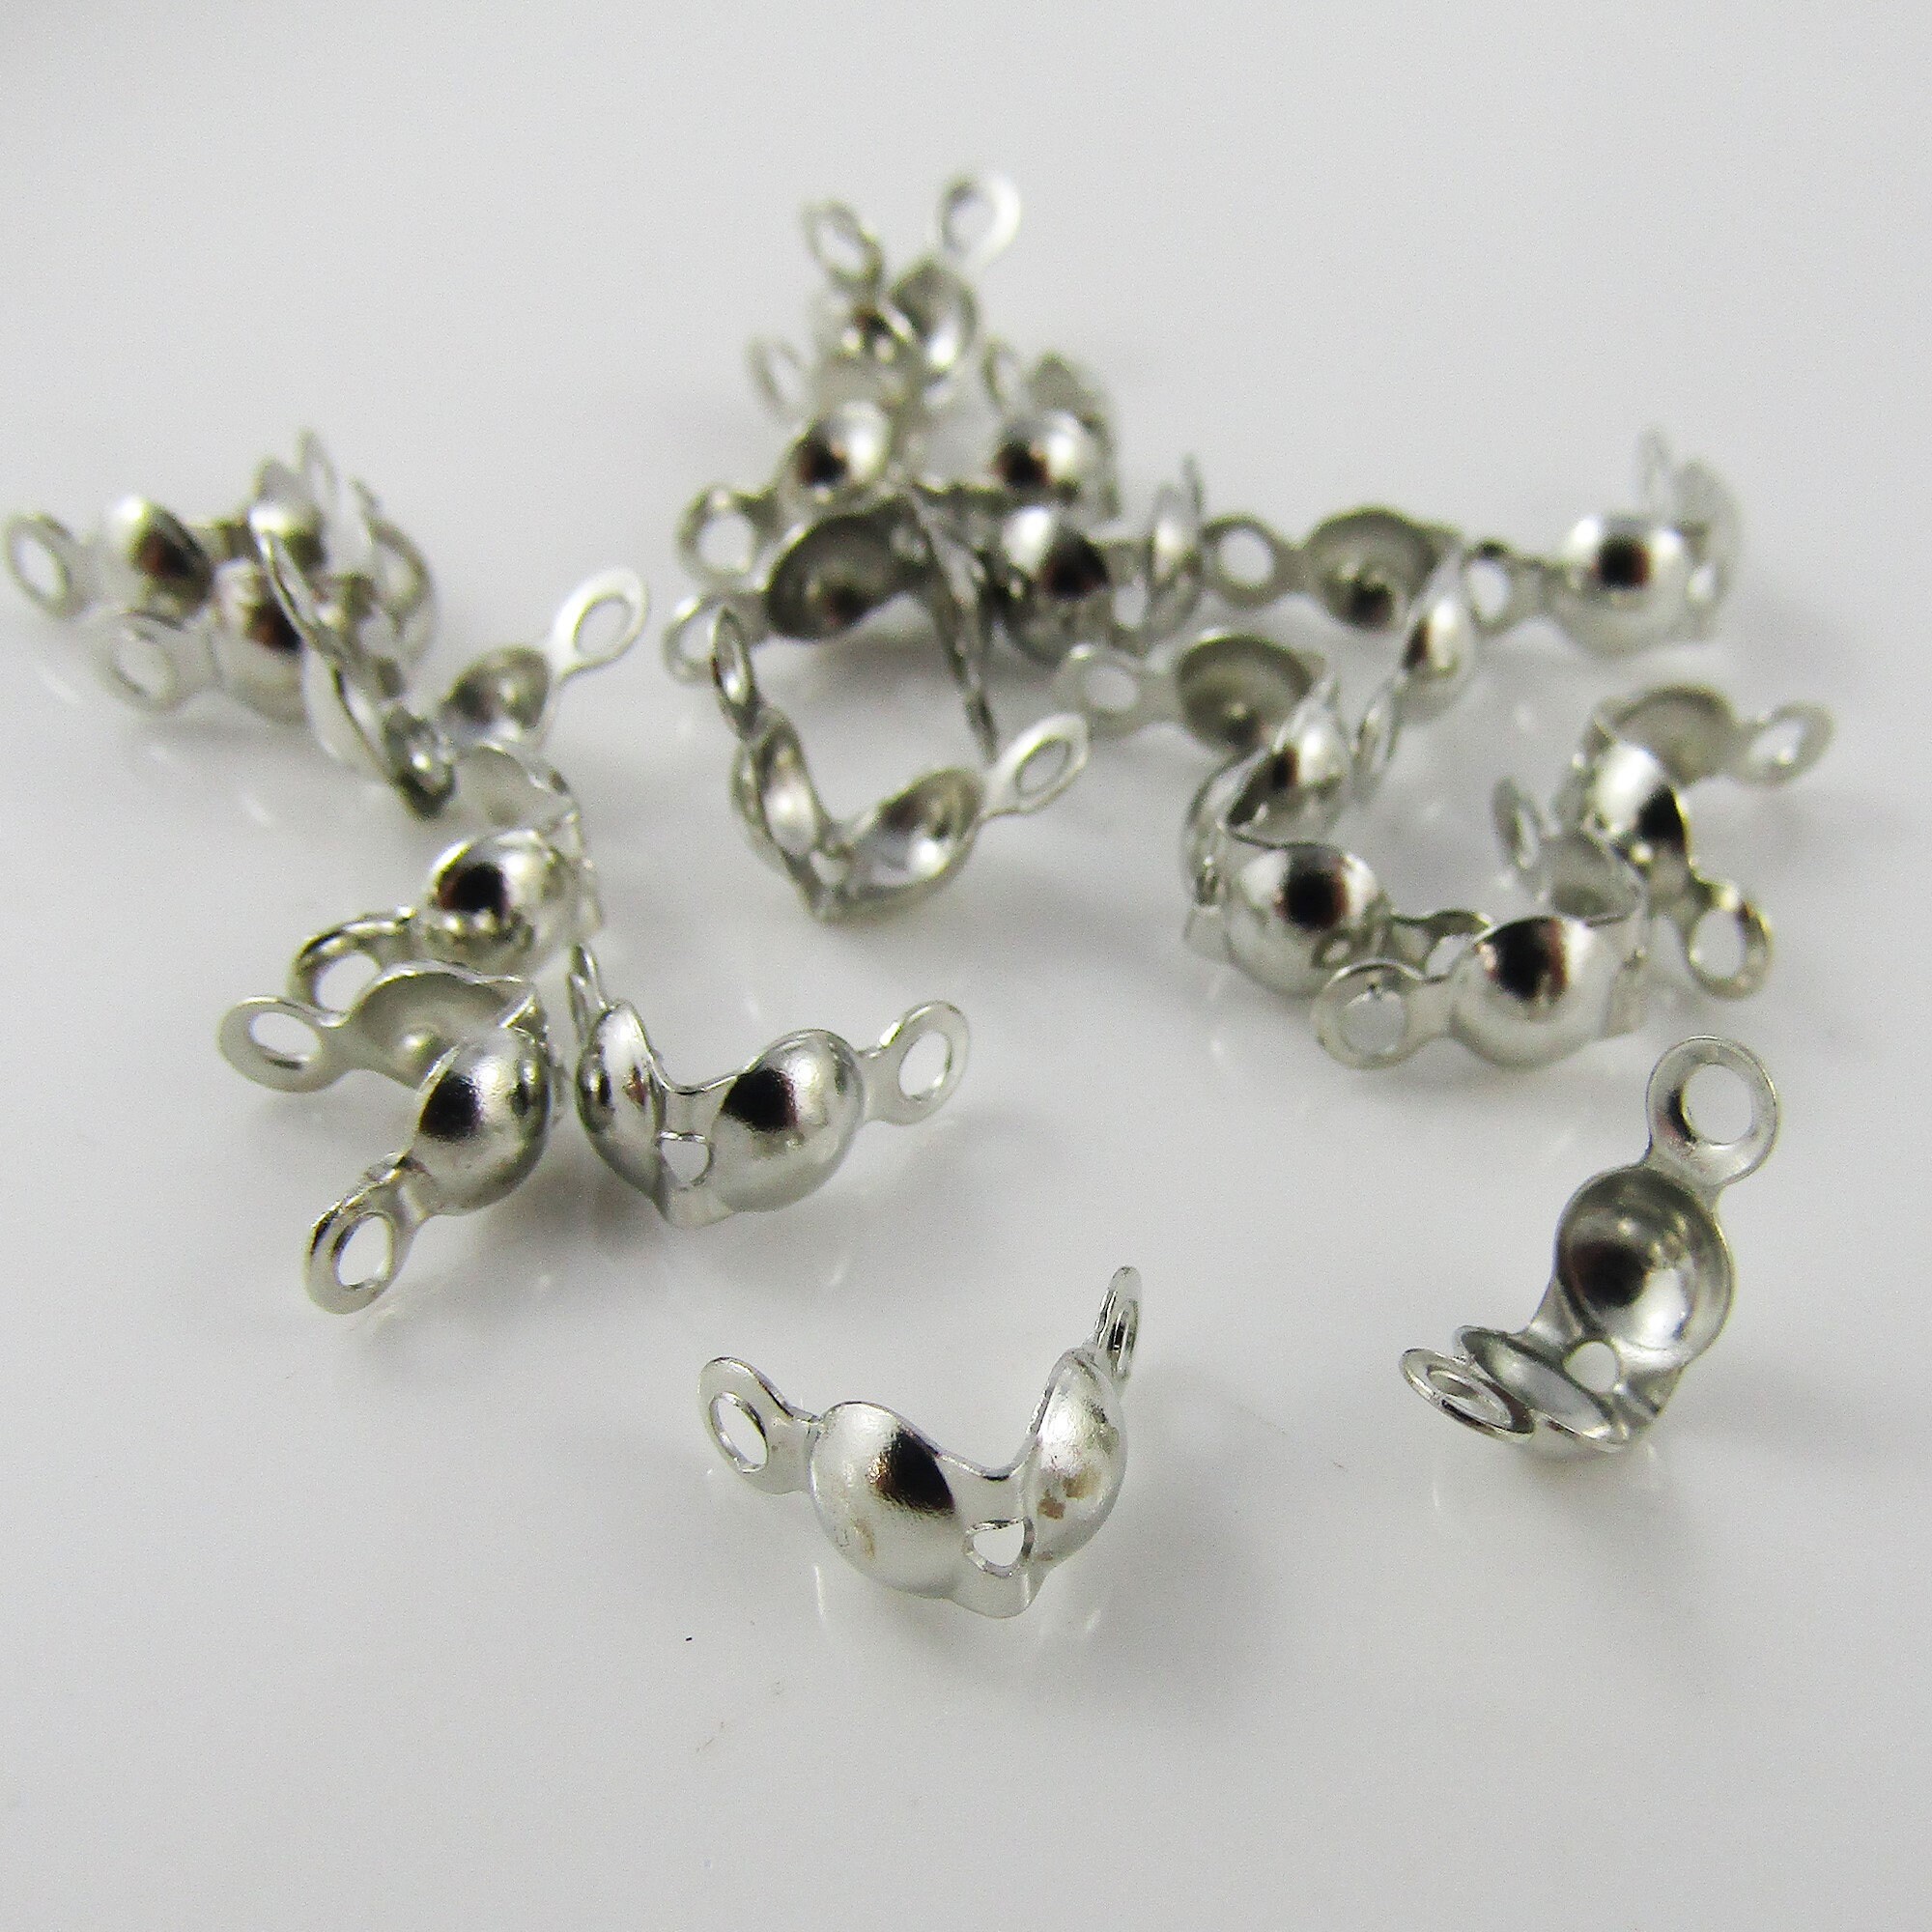 Sterling Silver Crimp Cover Beads, S925 Silver Crimp Beads for Jewelry  Making Supplies, Cover Bead 